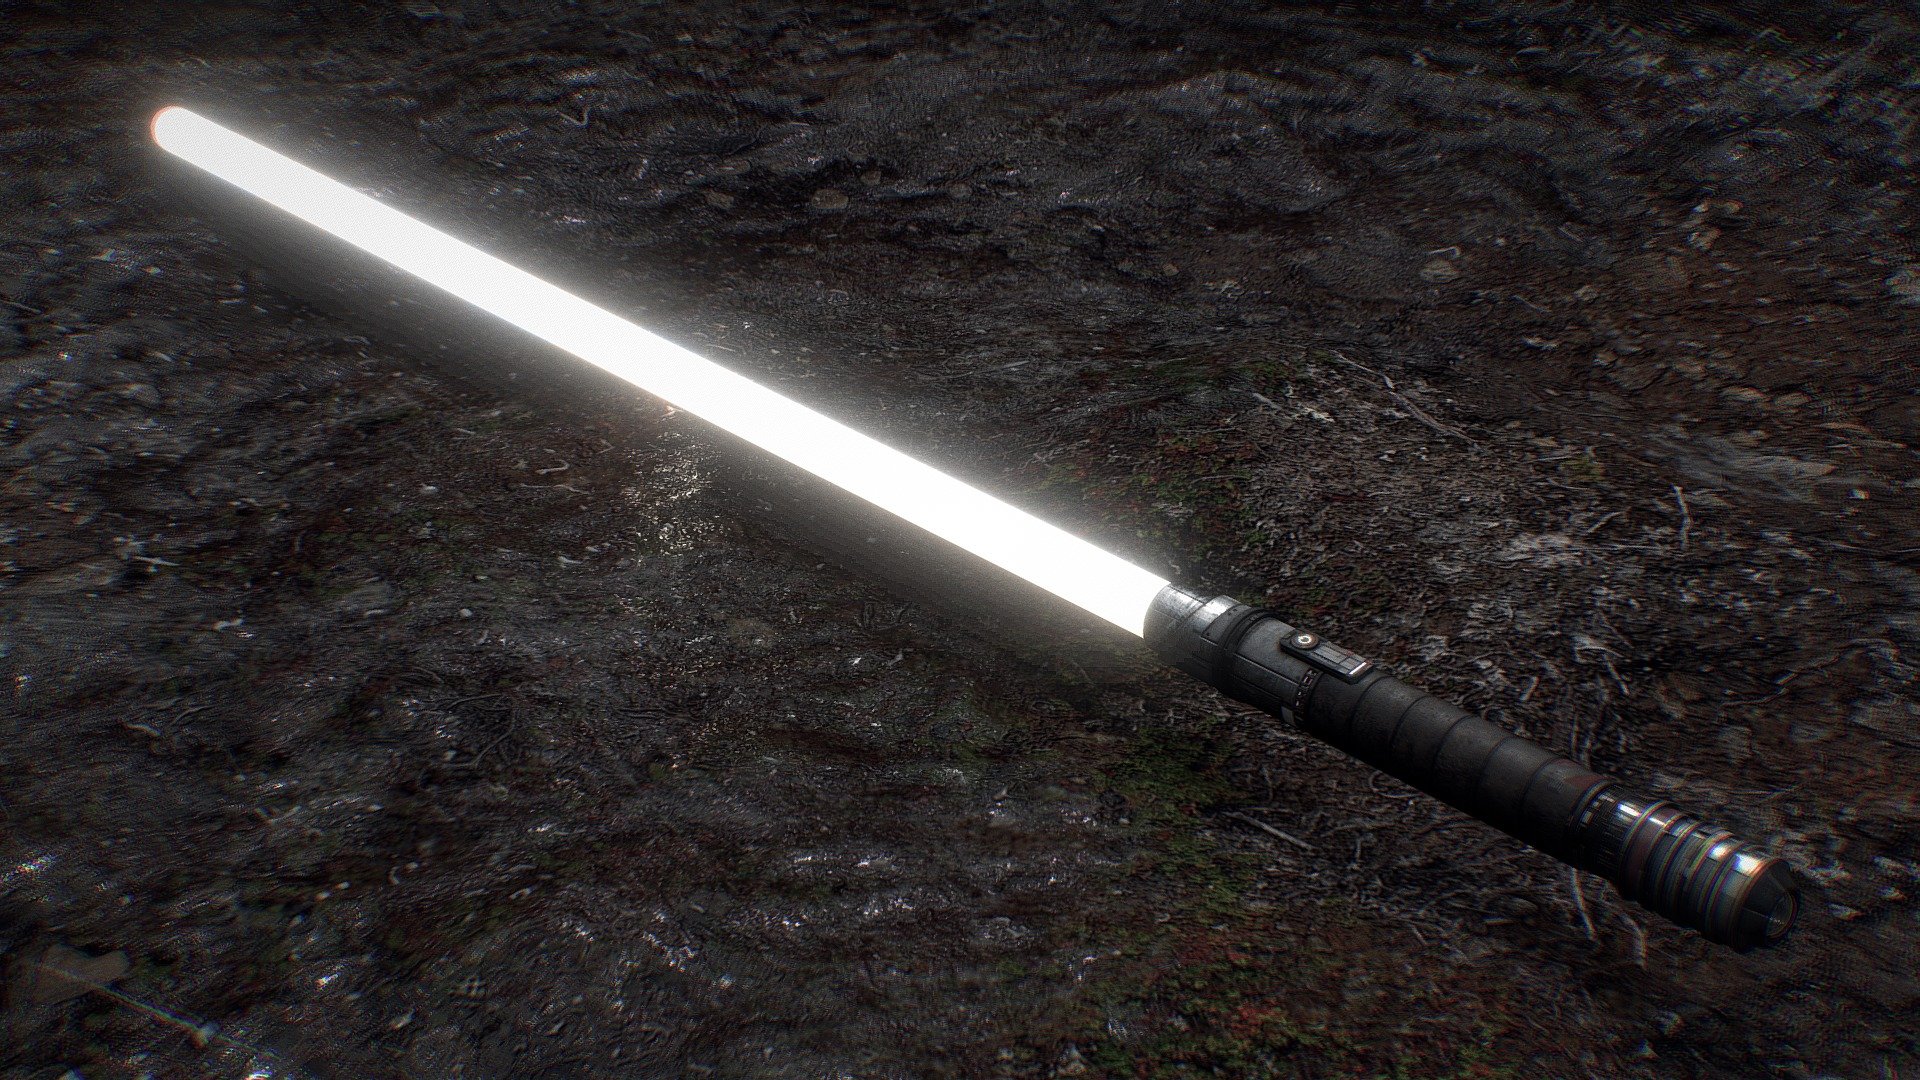 Star Wars Lightsaber fan art

Drag and Drop and you are good to go. 4k Textures. It is possible to change the image by editing the emissive map. It is a very simple process.

Check my profile for free models https://sketchfab.com/re1monsen If you enjoy my work please consider supporting me I have many affordable models in the shop. Smash that follow!

Feel free to contact me. I’d love yo hear from you.

Thanks! - Lightsaber fan art - Download Free 3D model by re1monsen 3d model